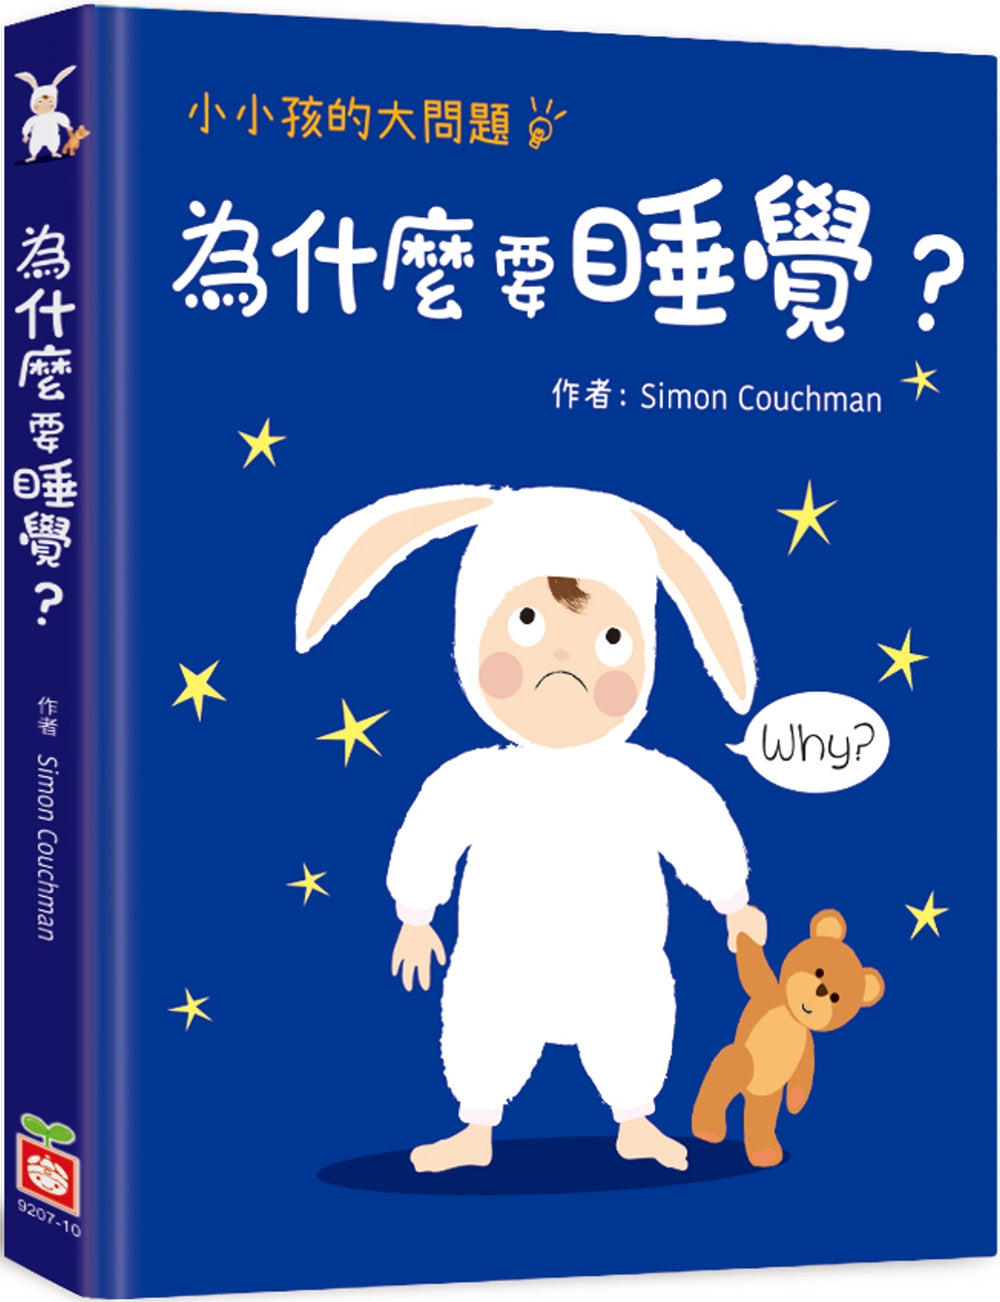 Why Do I Have to Go to Bed? • 小小孩的大問題：為什麼要睡覺？（厚紙翻翻書）